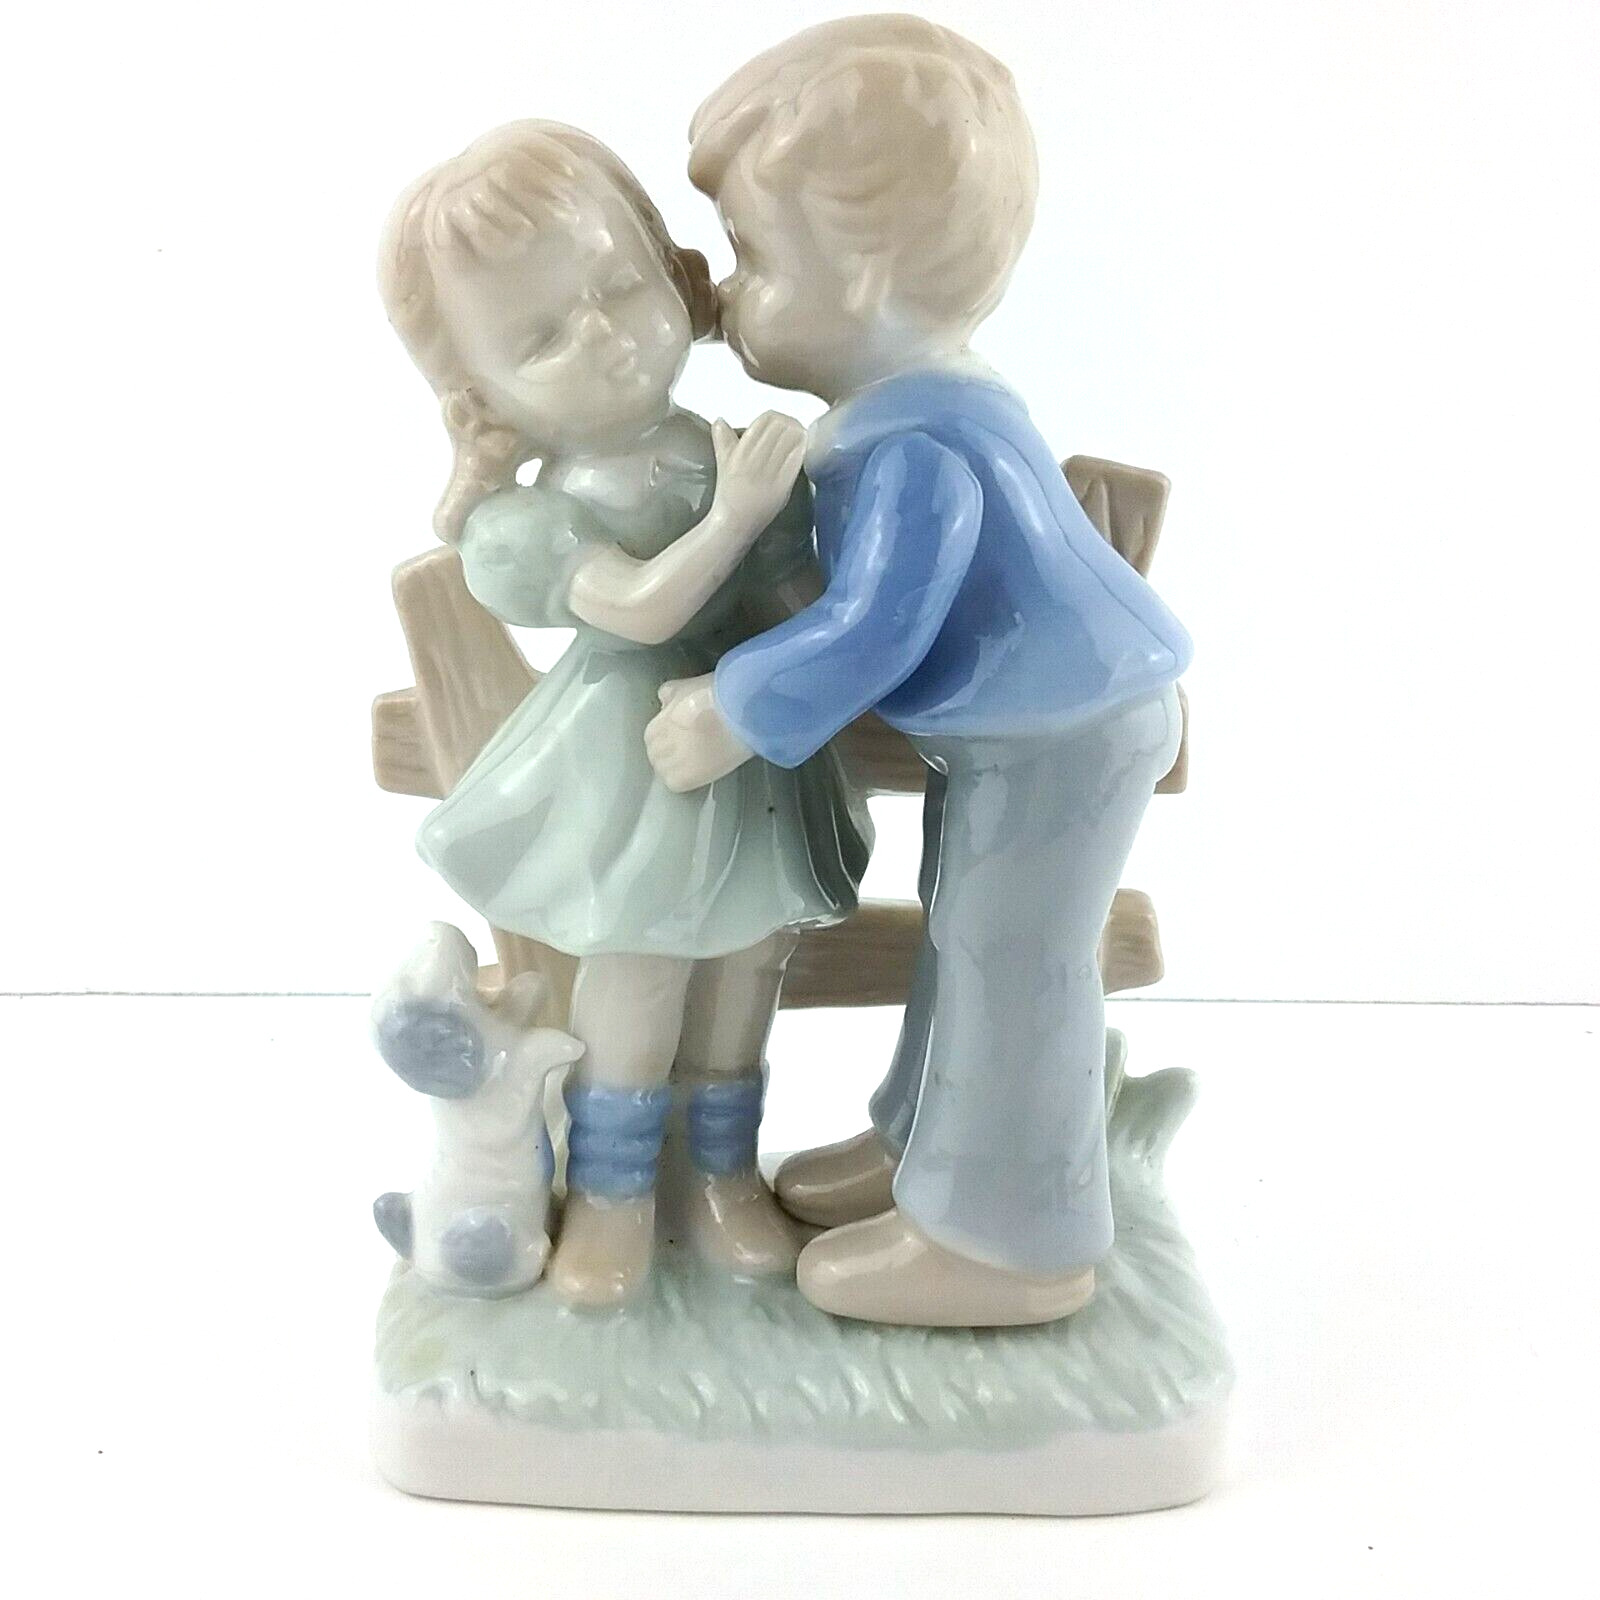 Lego Figurines Young Love Boy Girl Kissing Puppy  Pastel Colors Porcelain Glazed